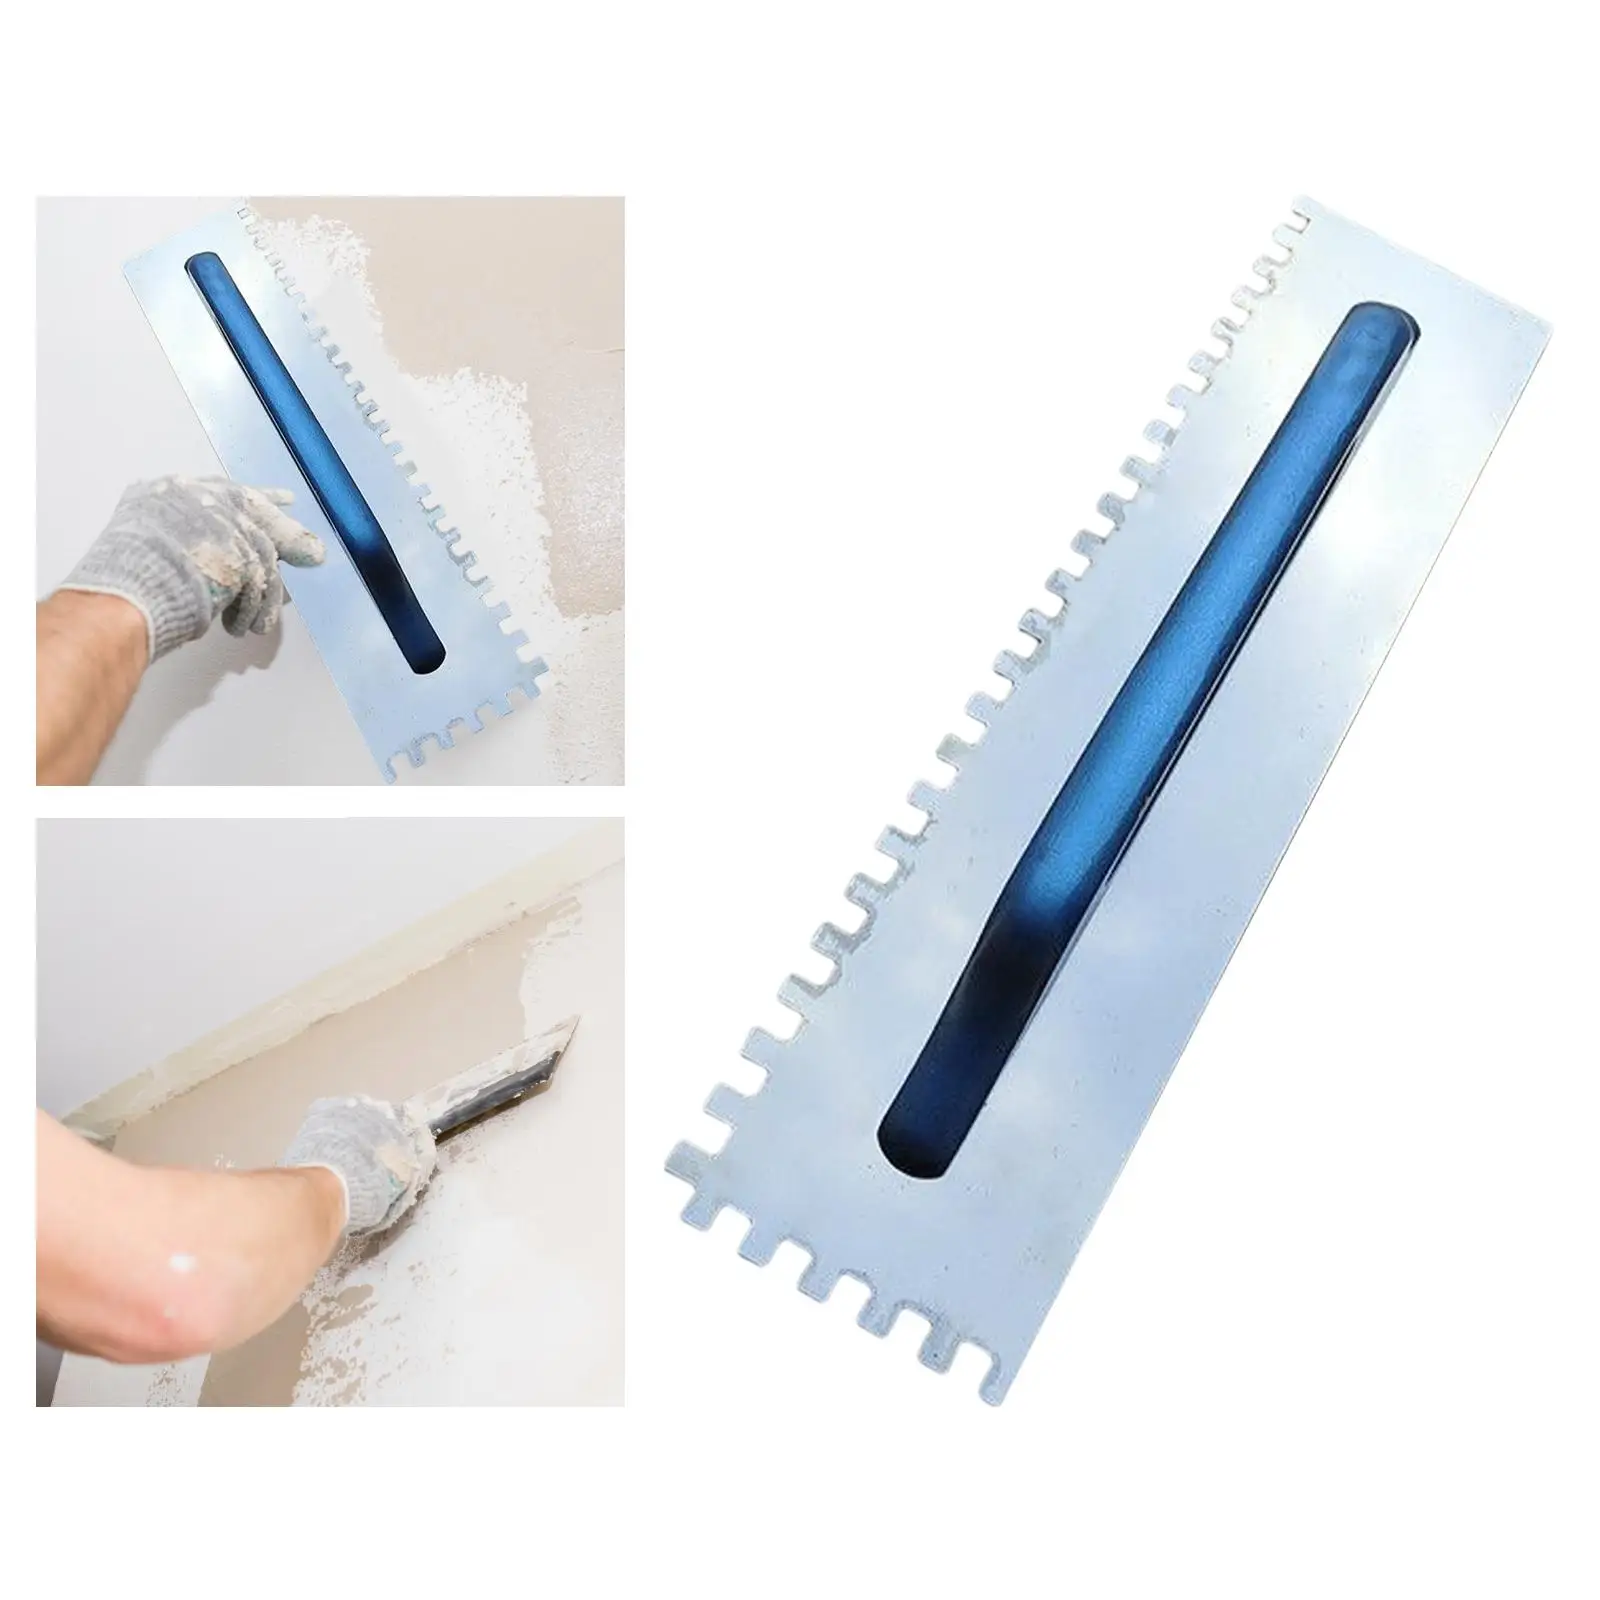 Drywall Smoothing Spatula Construction Tool Plaster Trowel Concrete Scraping Tool Wall Plastering Mud Floor Wall Tile Painting